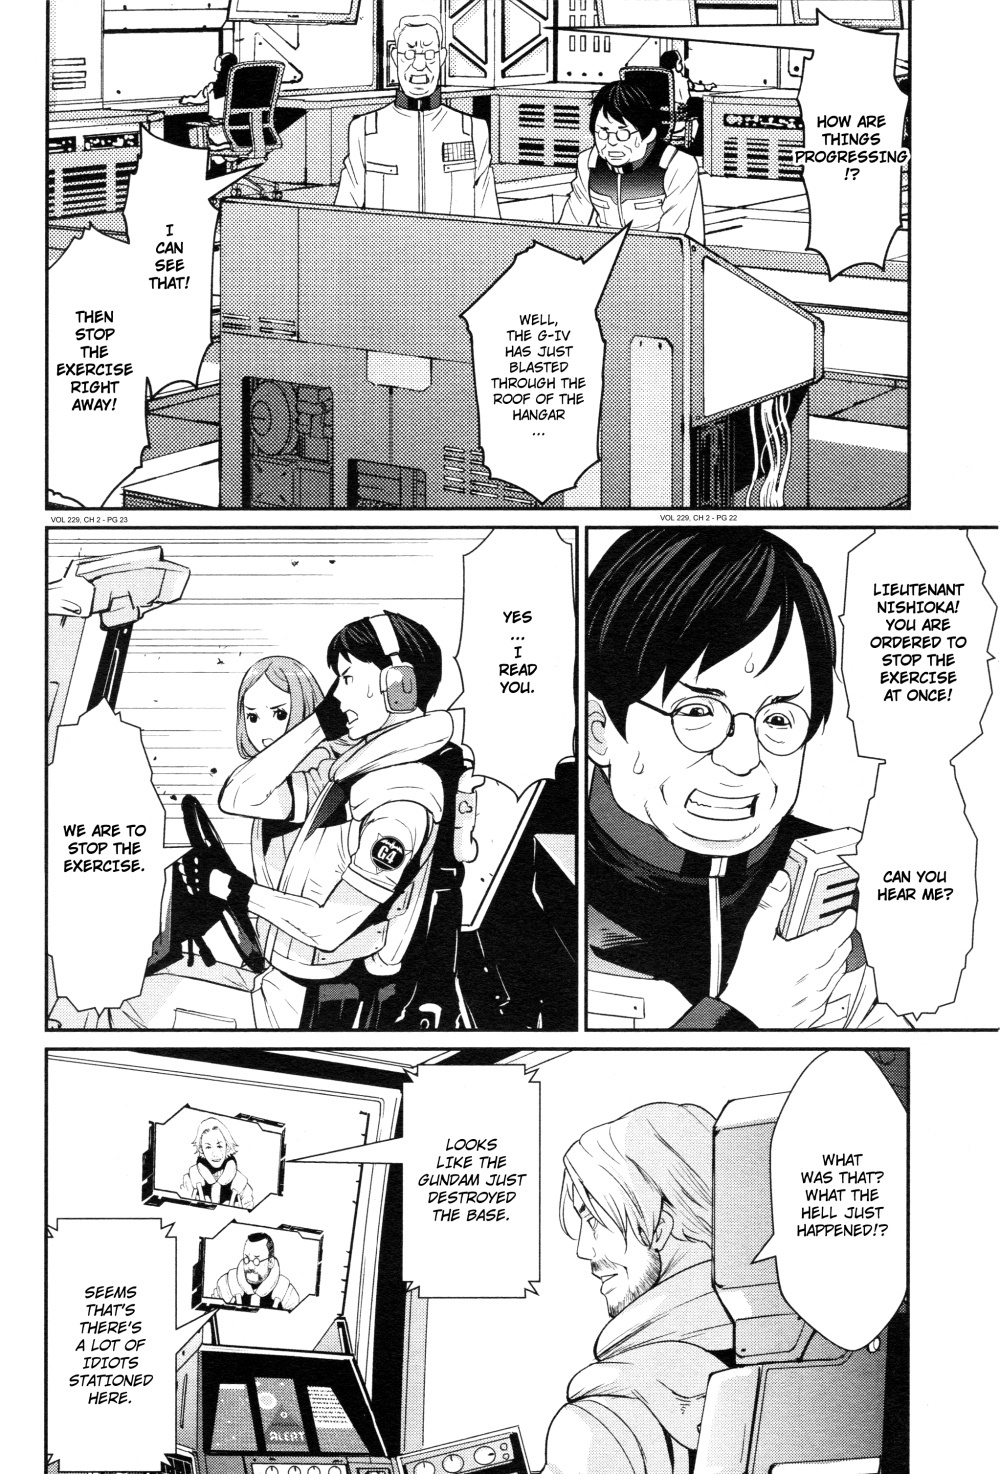 Mobile Suit Gundam 0080 - War In The Pocket Chapter 2 #20